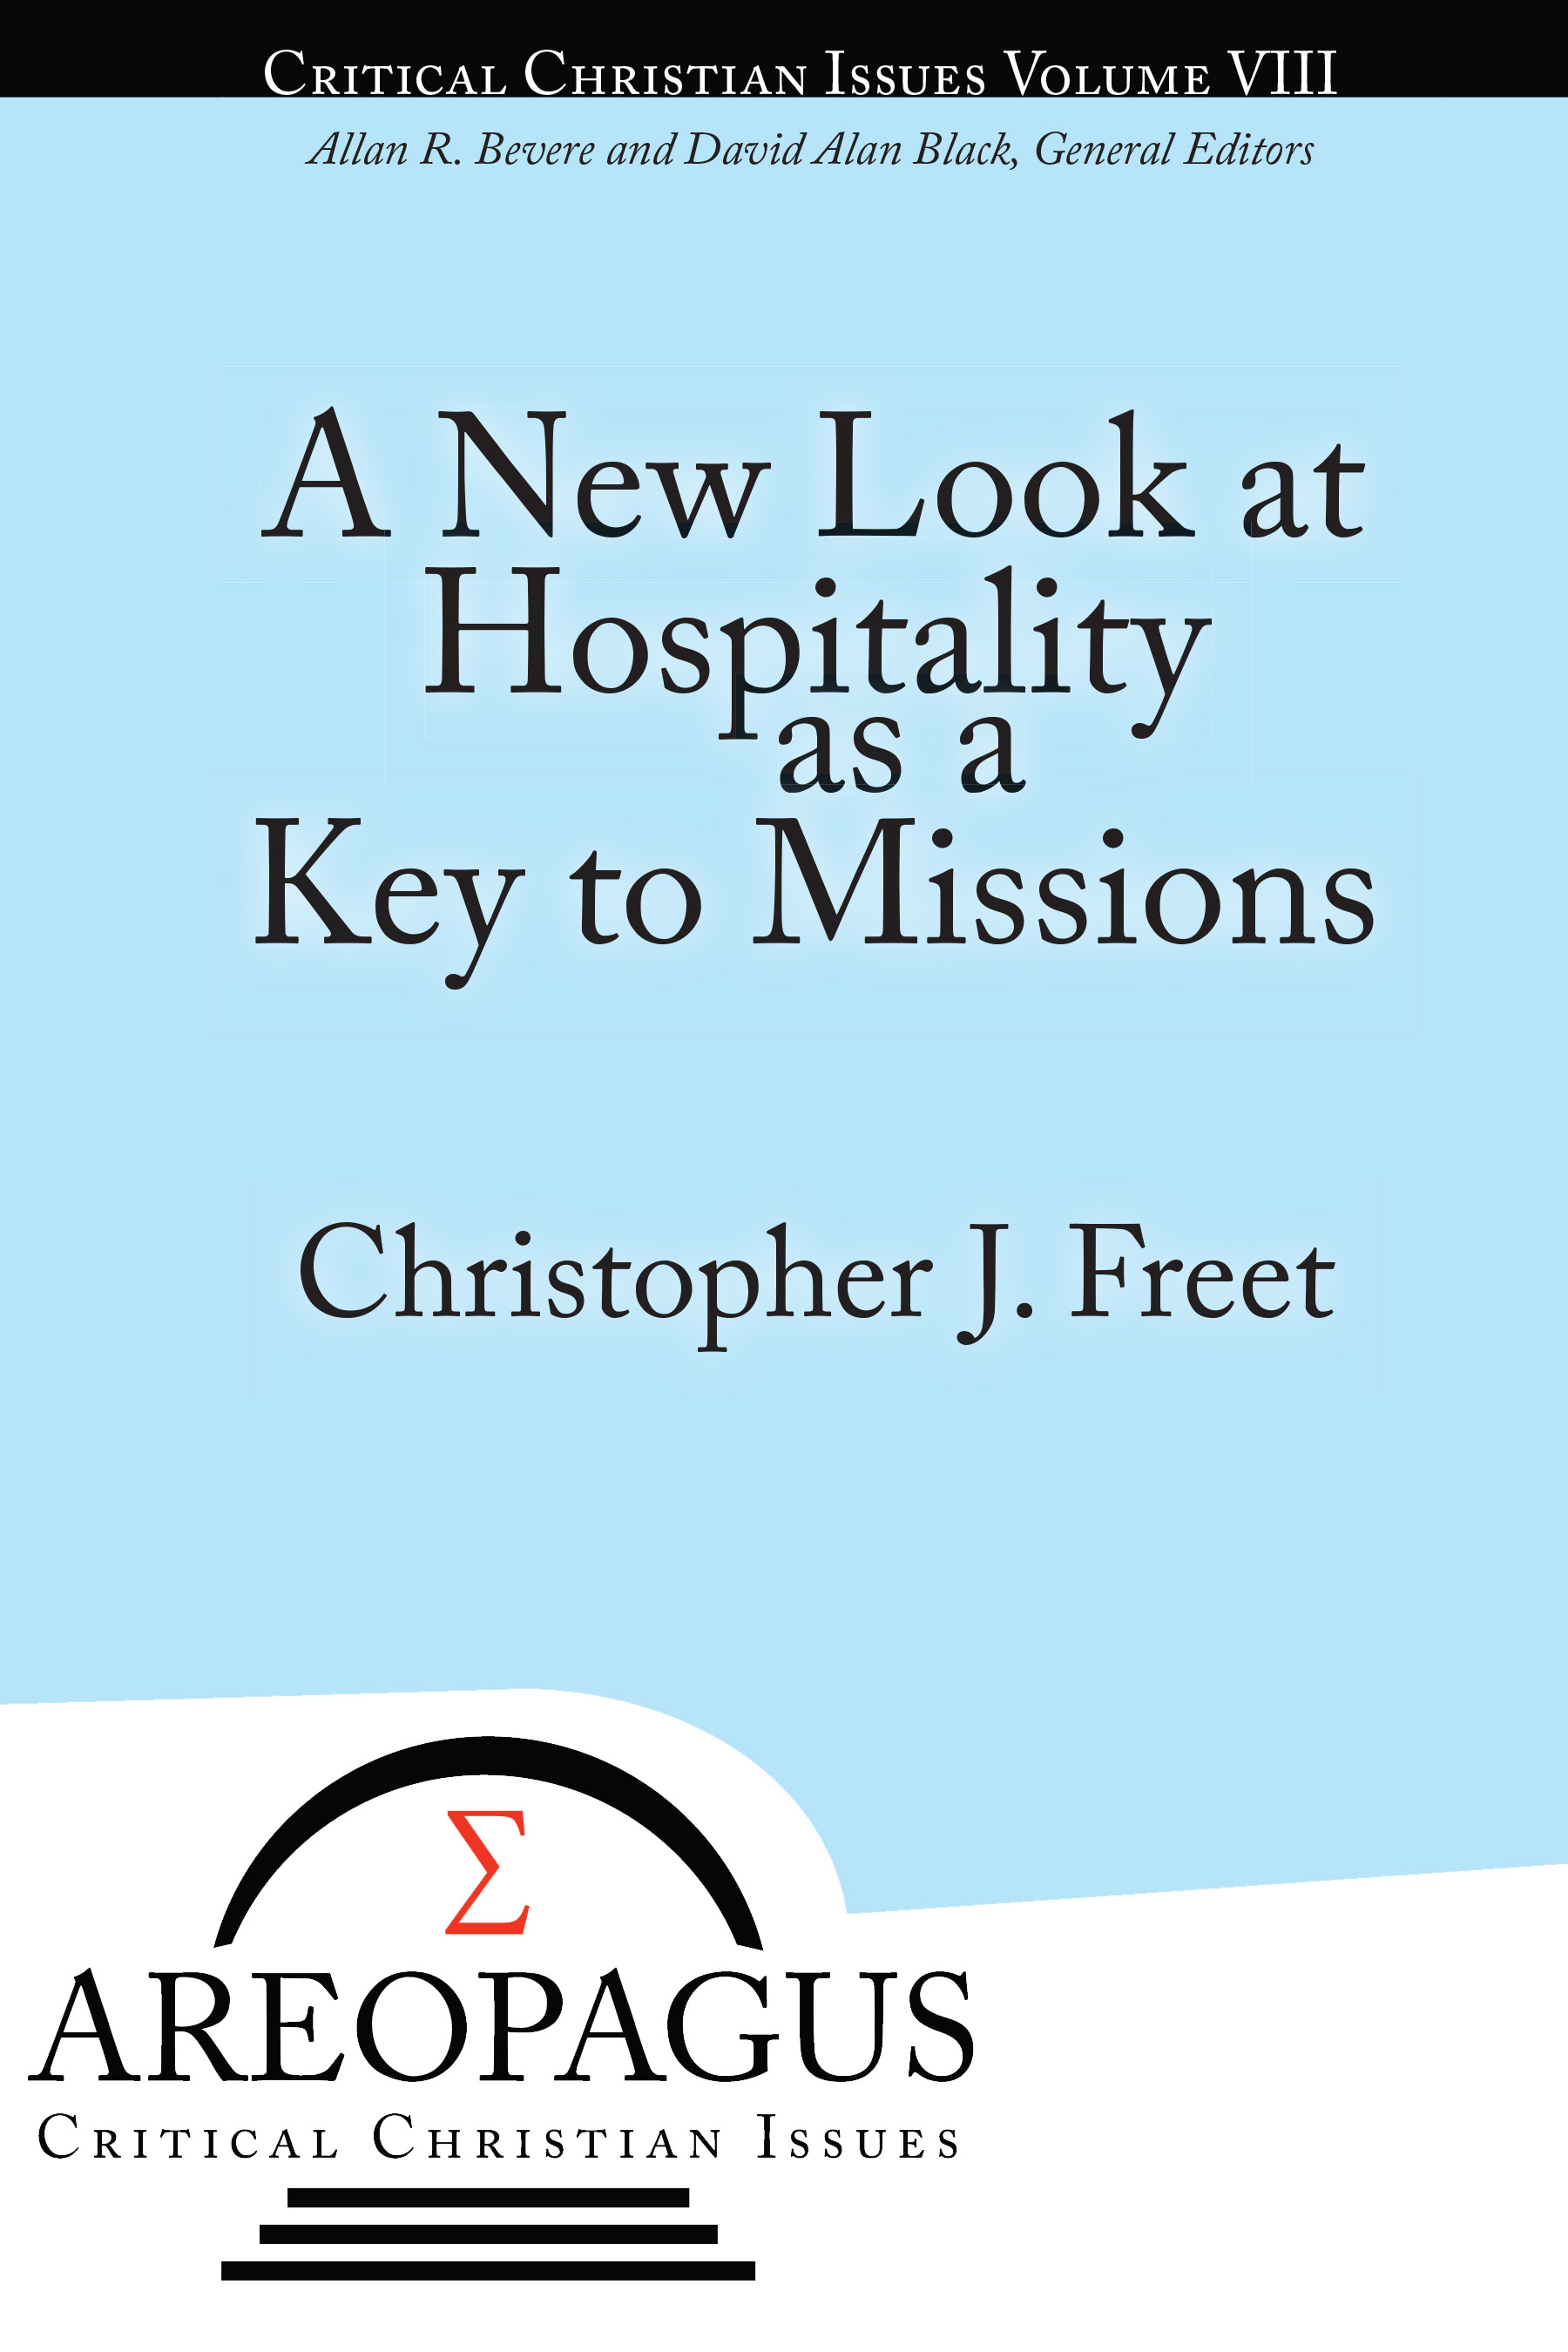 Next Volume: A New Look at Hospitality as a Key to Missions